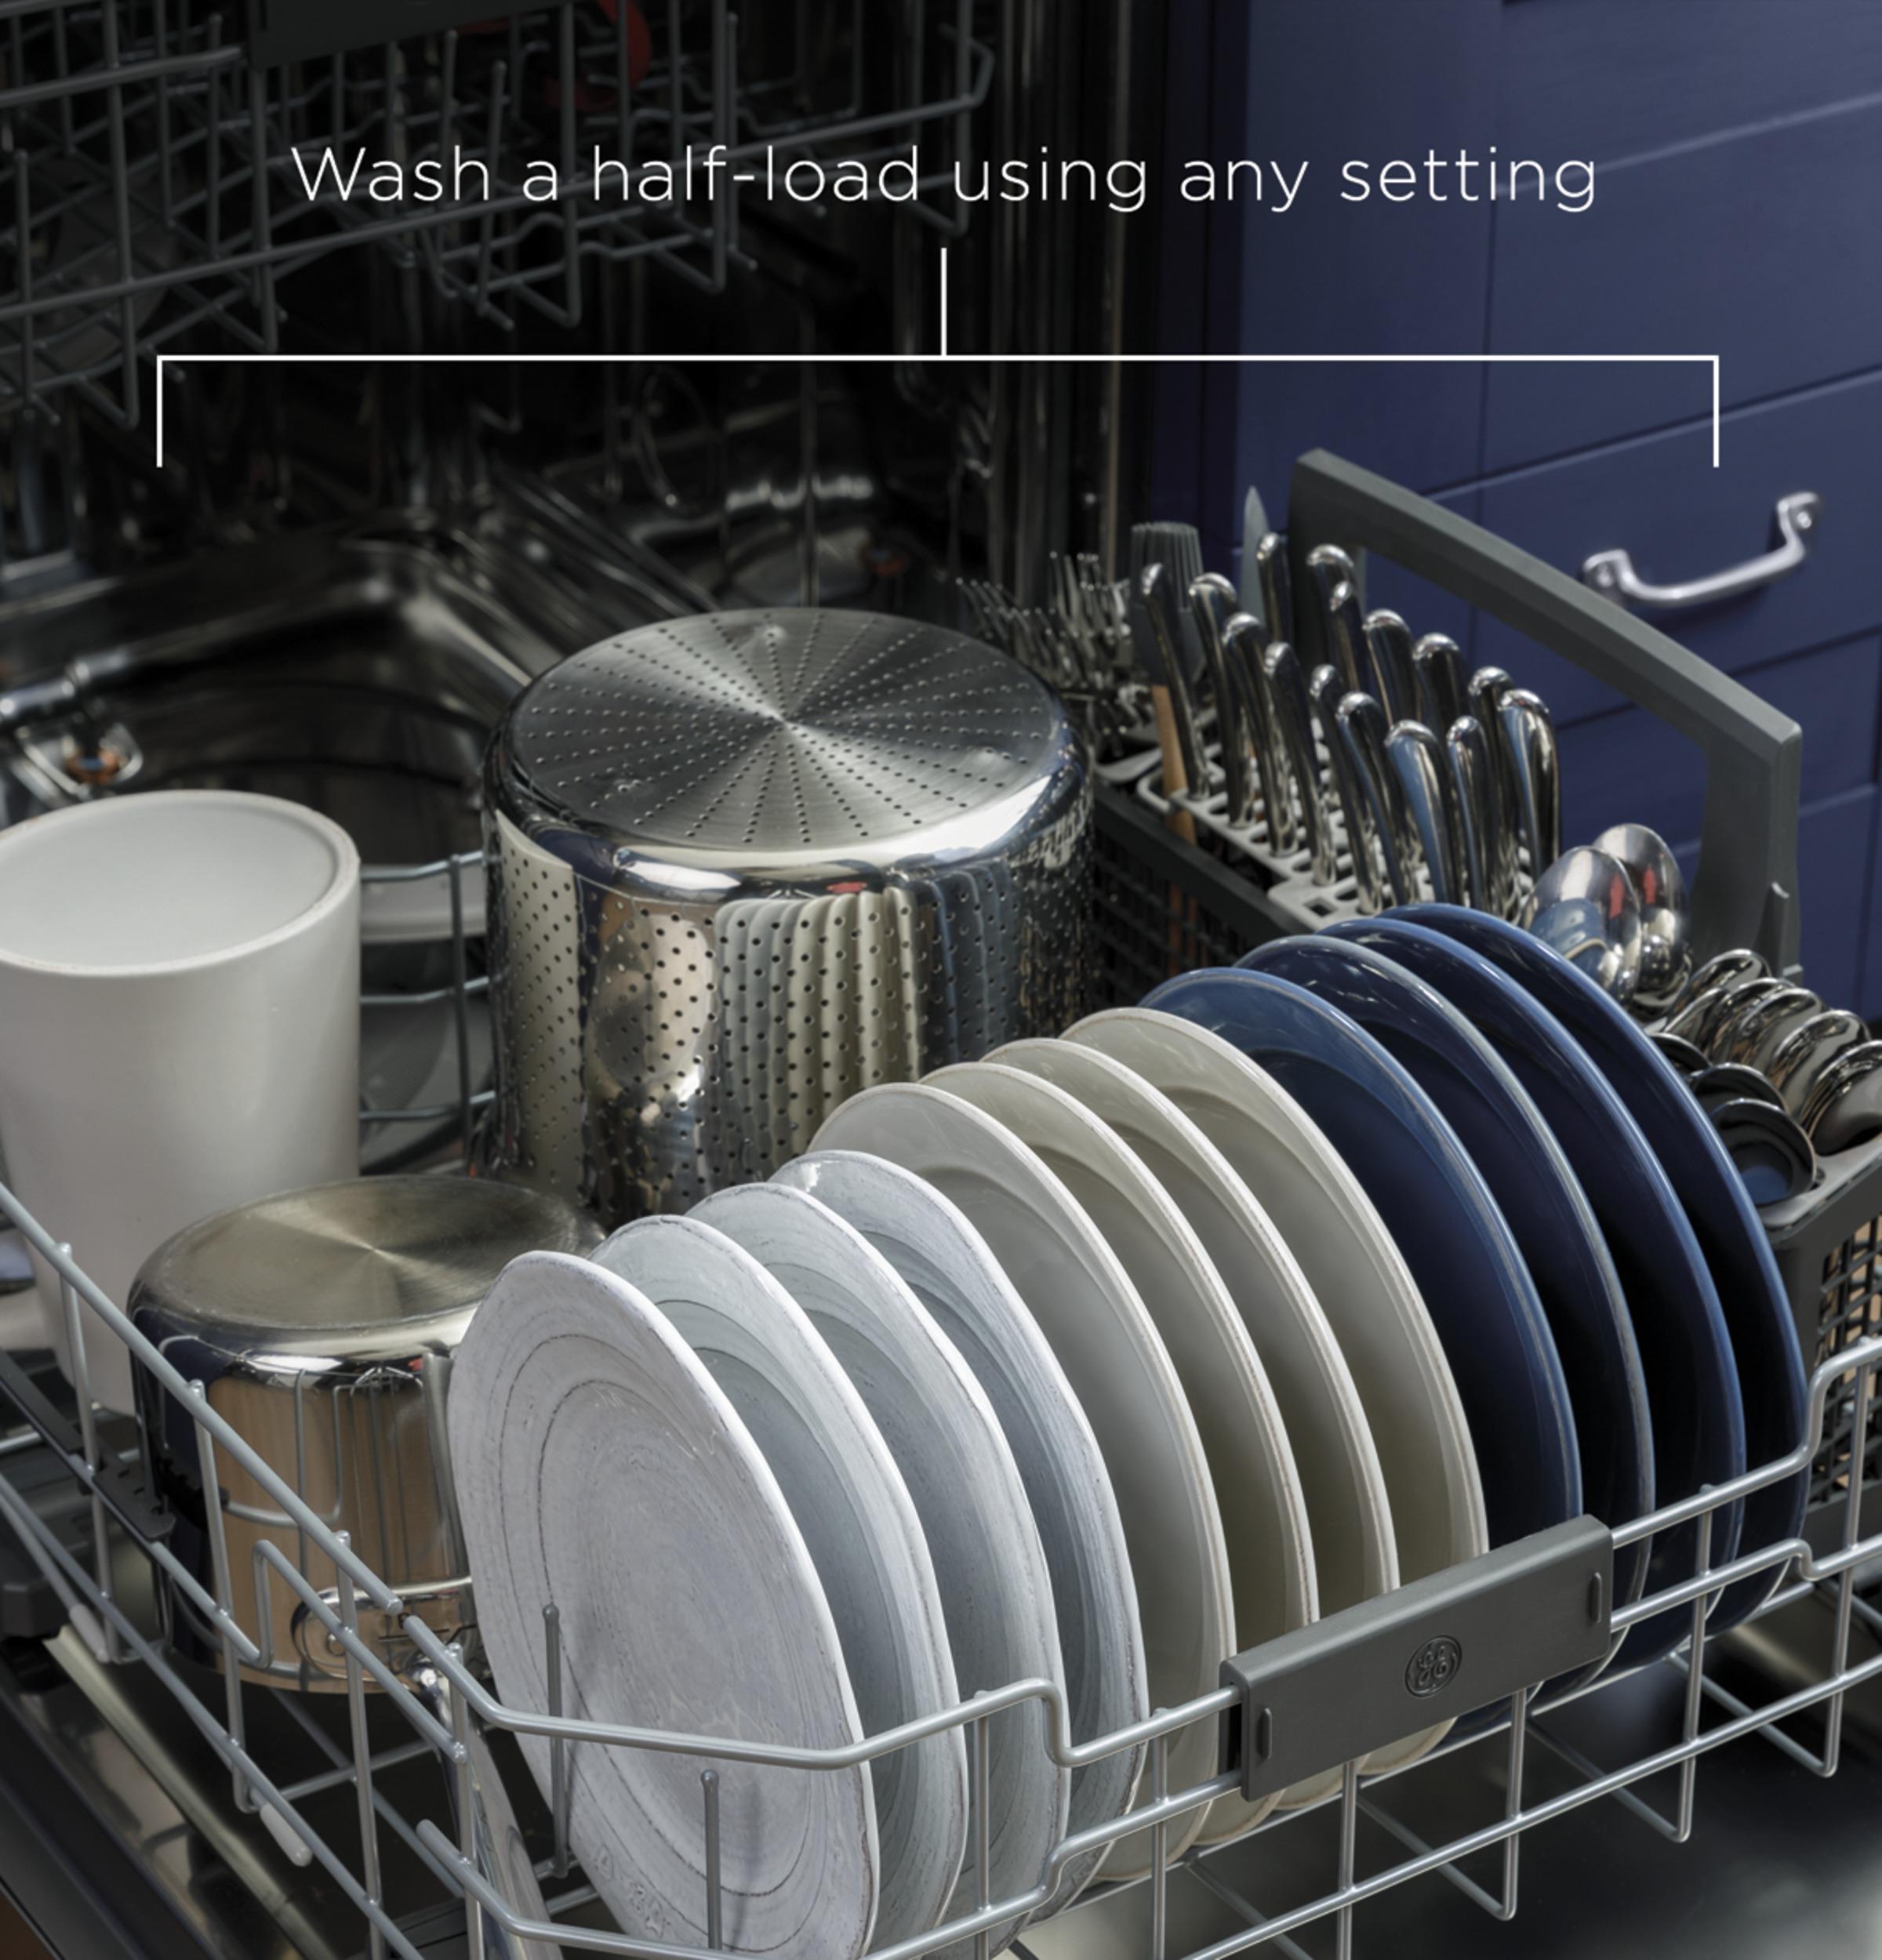 GE® Top Control with Stainless Steel Interior Dishwasher with Sanitize Cycle & Dry Boost with Fan Assist